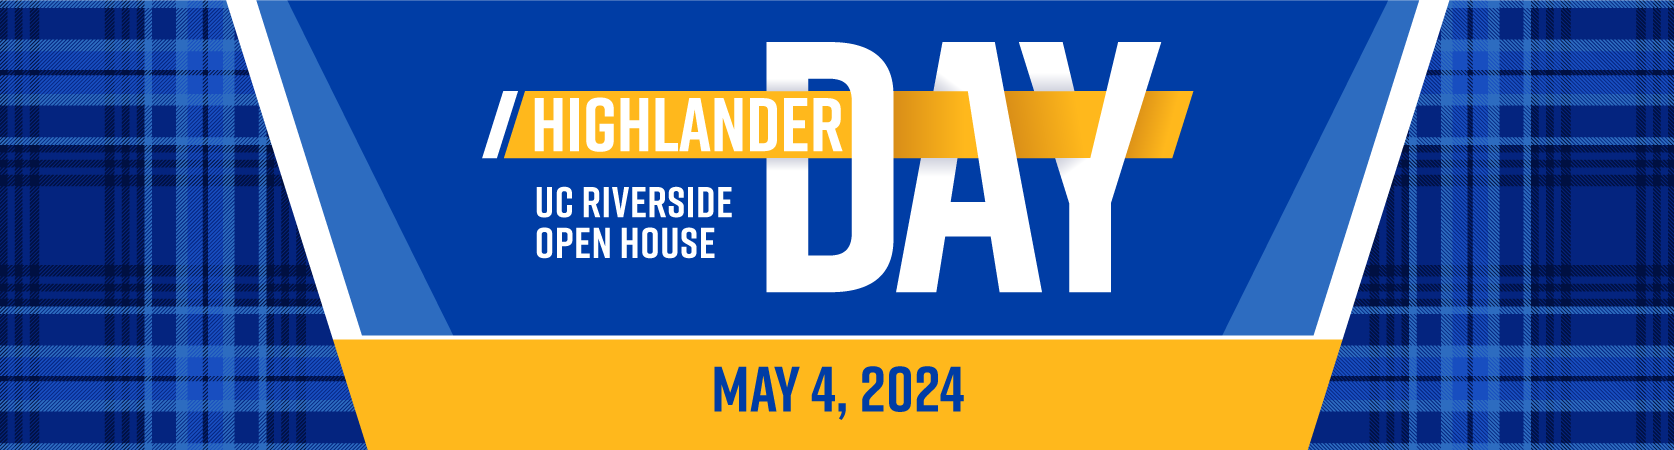 Graphic promoting UCR's Highlander Day Open house on Saturday, May 4, 2024